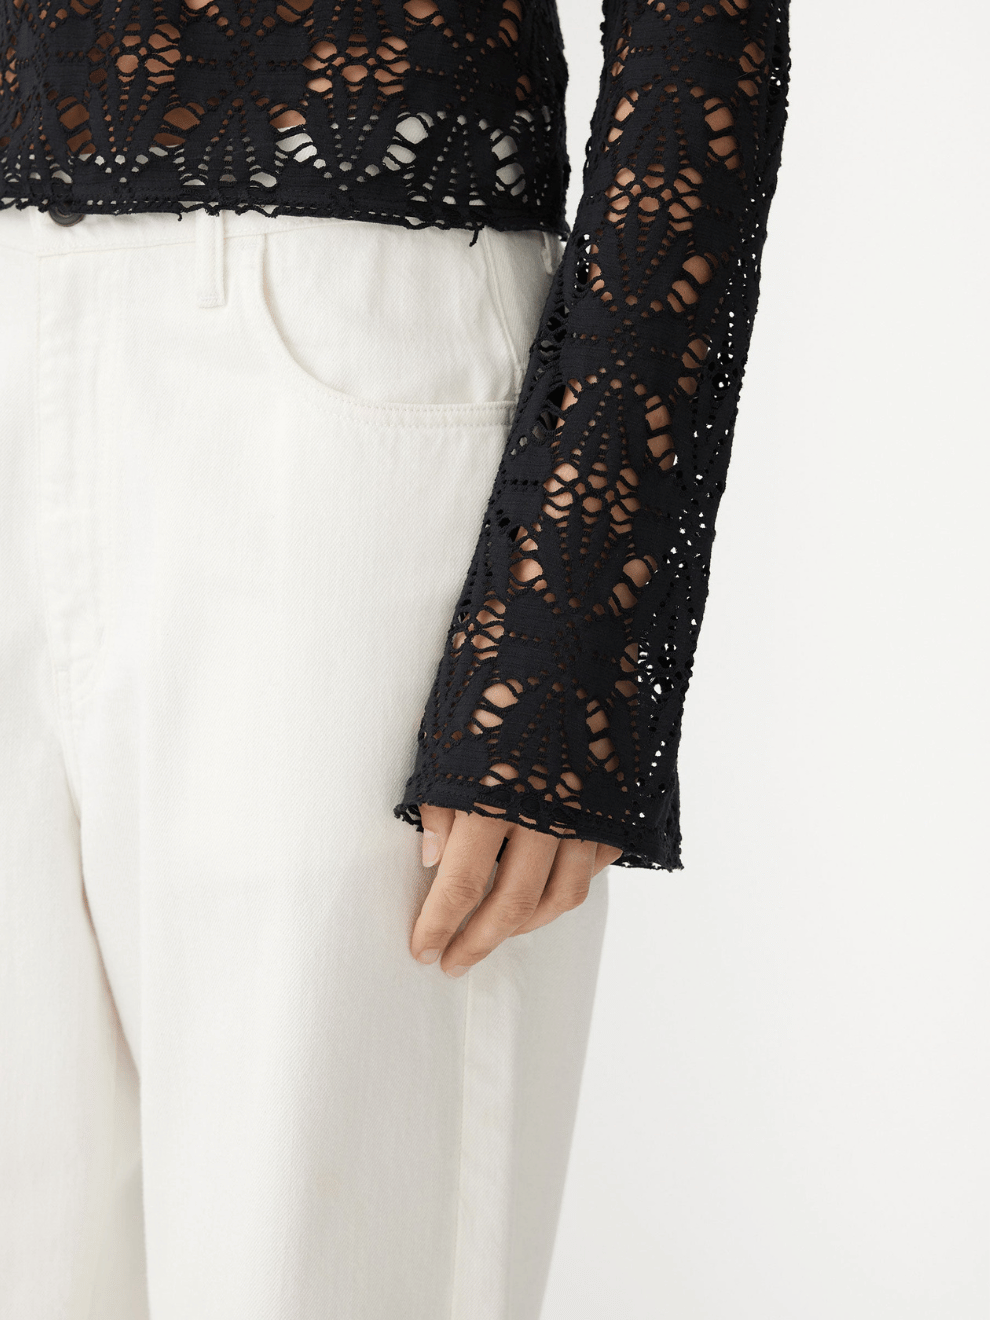 Long Sleeve Lace Top in Black